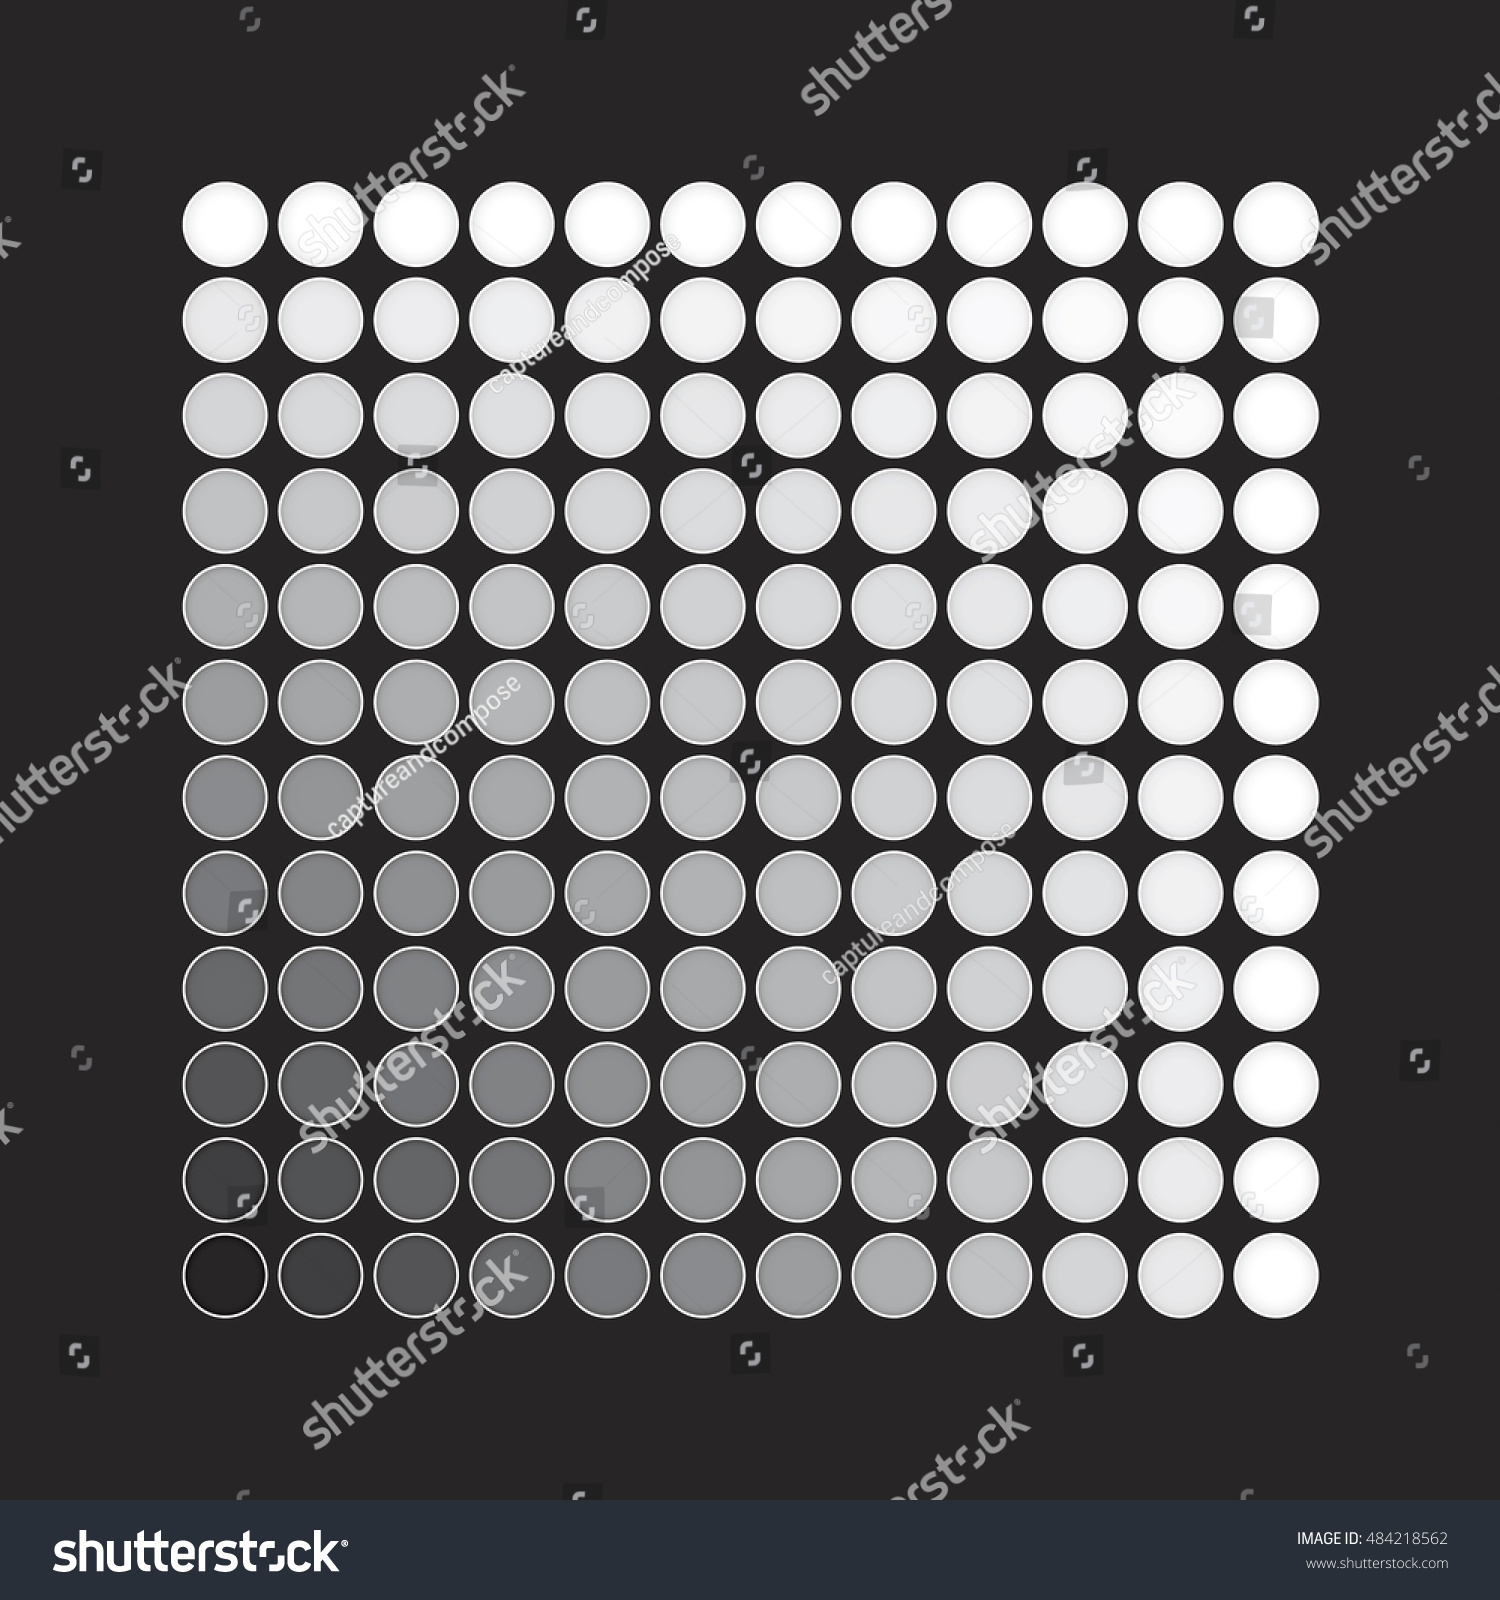 Dot pattern of CMYK color swatches arranged in a square grid. Shows color gradations and faded colors used in printing quality specifications #484218562